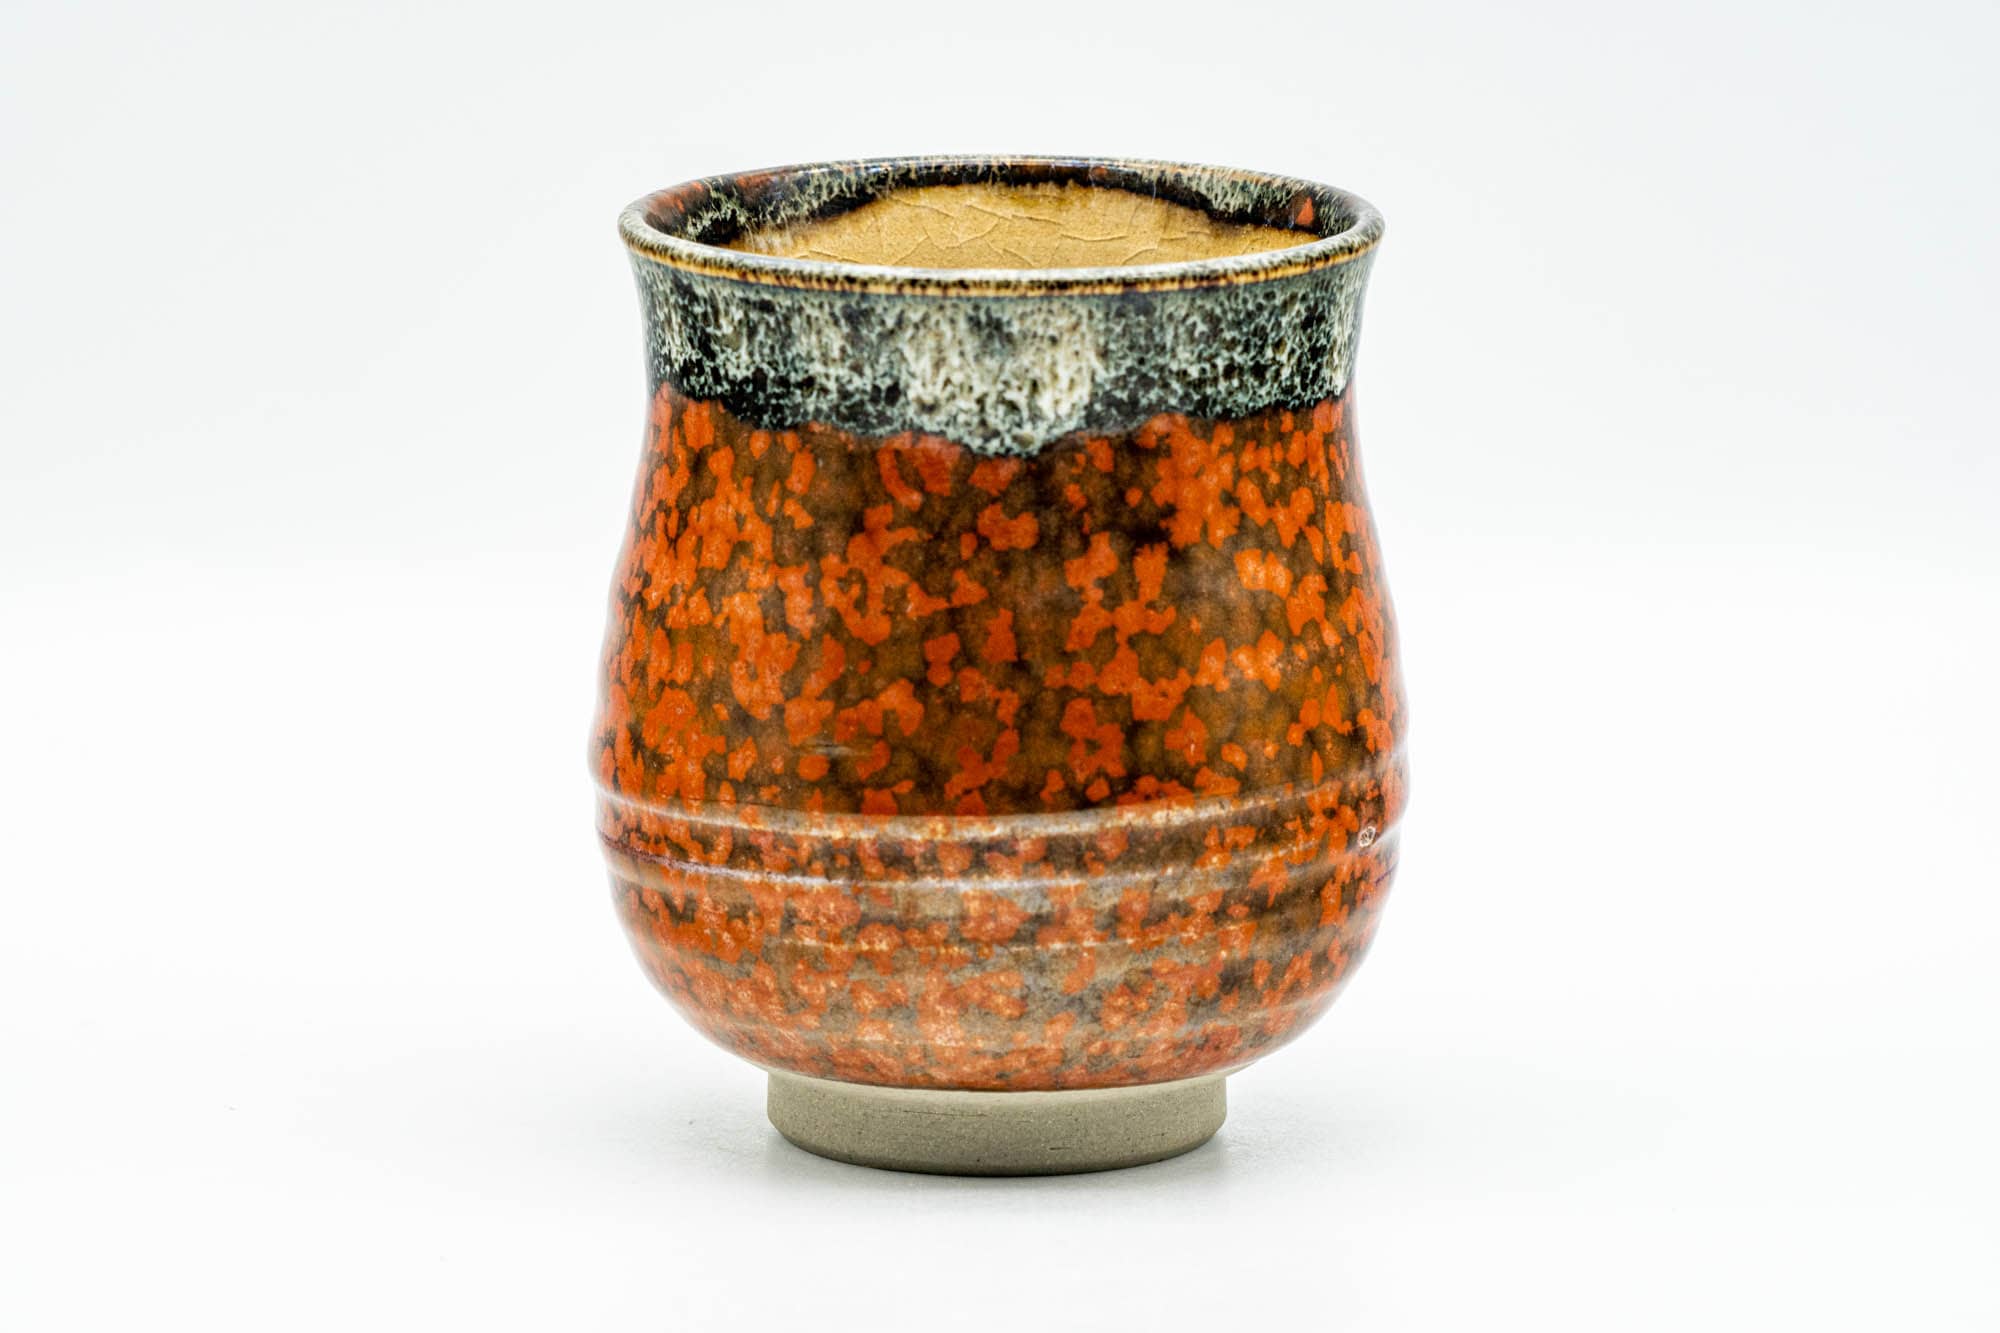 Japanese Teacup - Red Speckled Hare's Fur Glazed Yunomi - 160ml